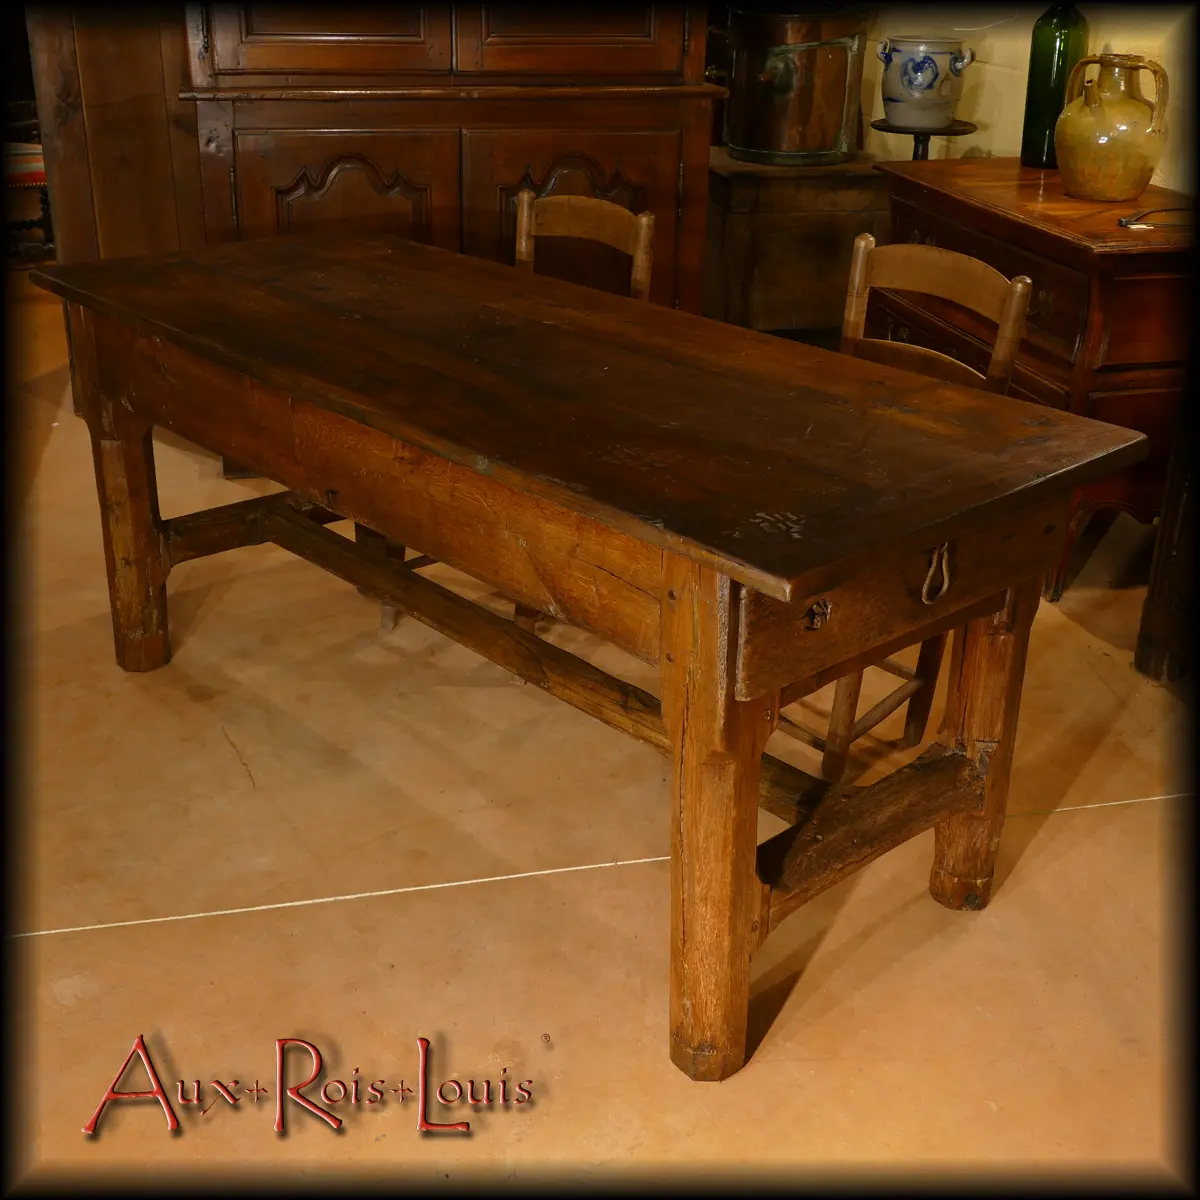 The cat bar on this Auvergne farmhouse table is notoriously raised and plush.